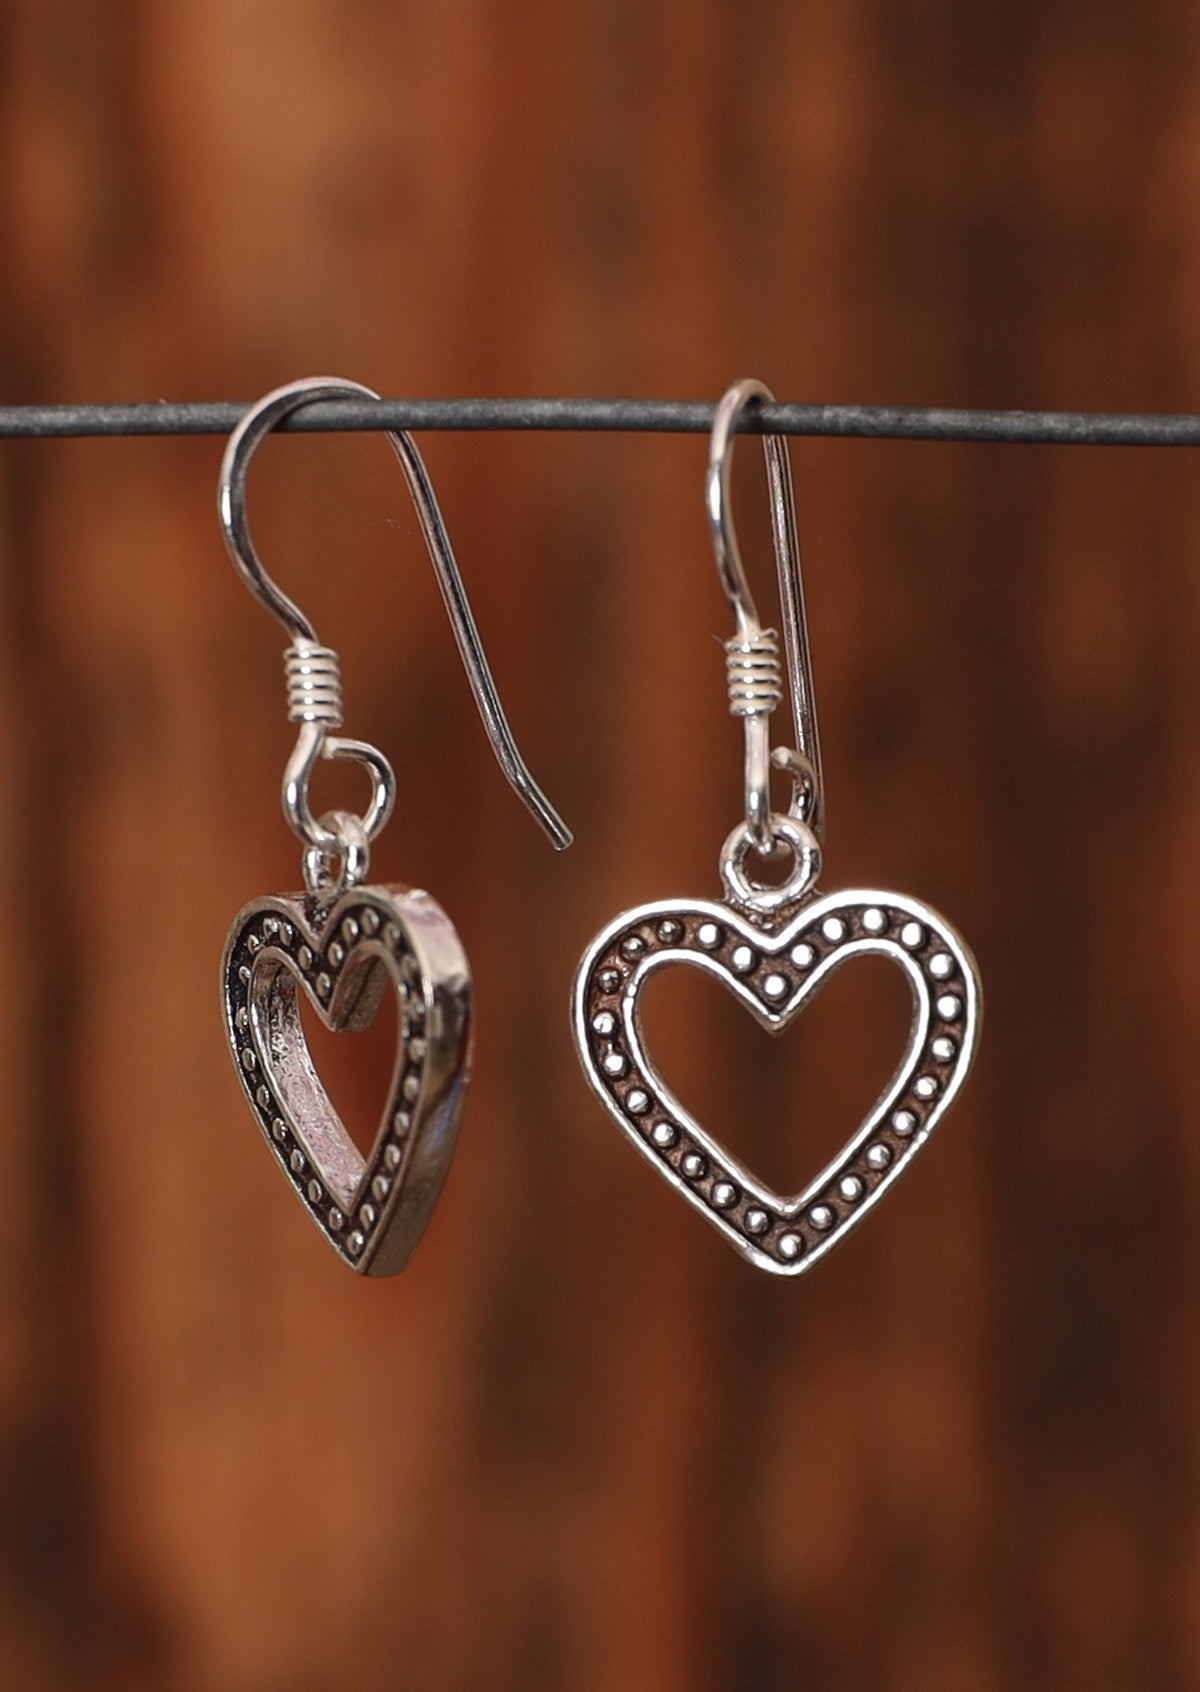 92.5% silver heart shaped earrings sit on a wire for display.